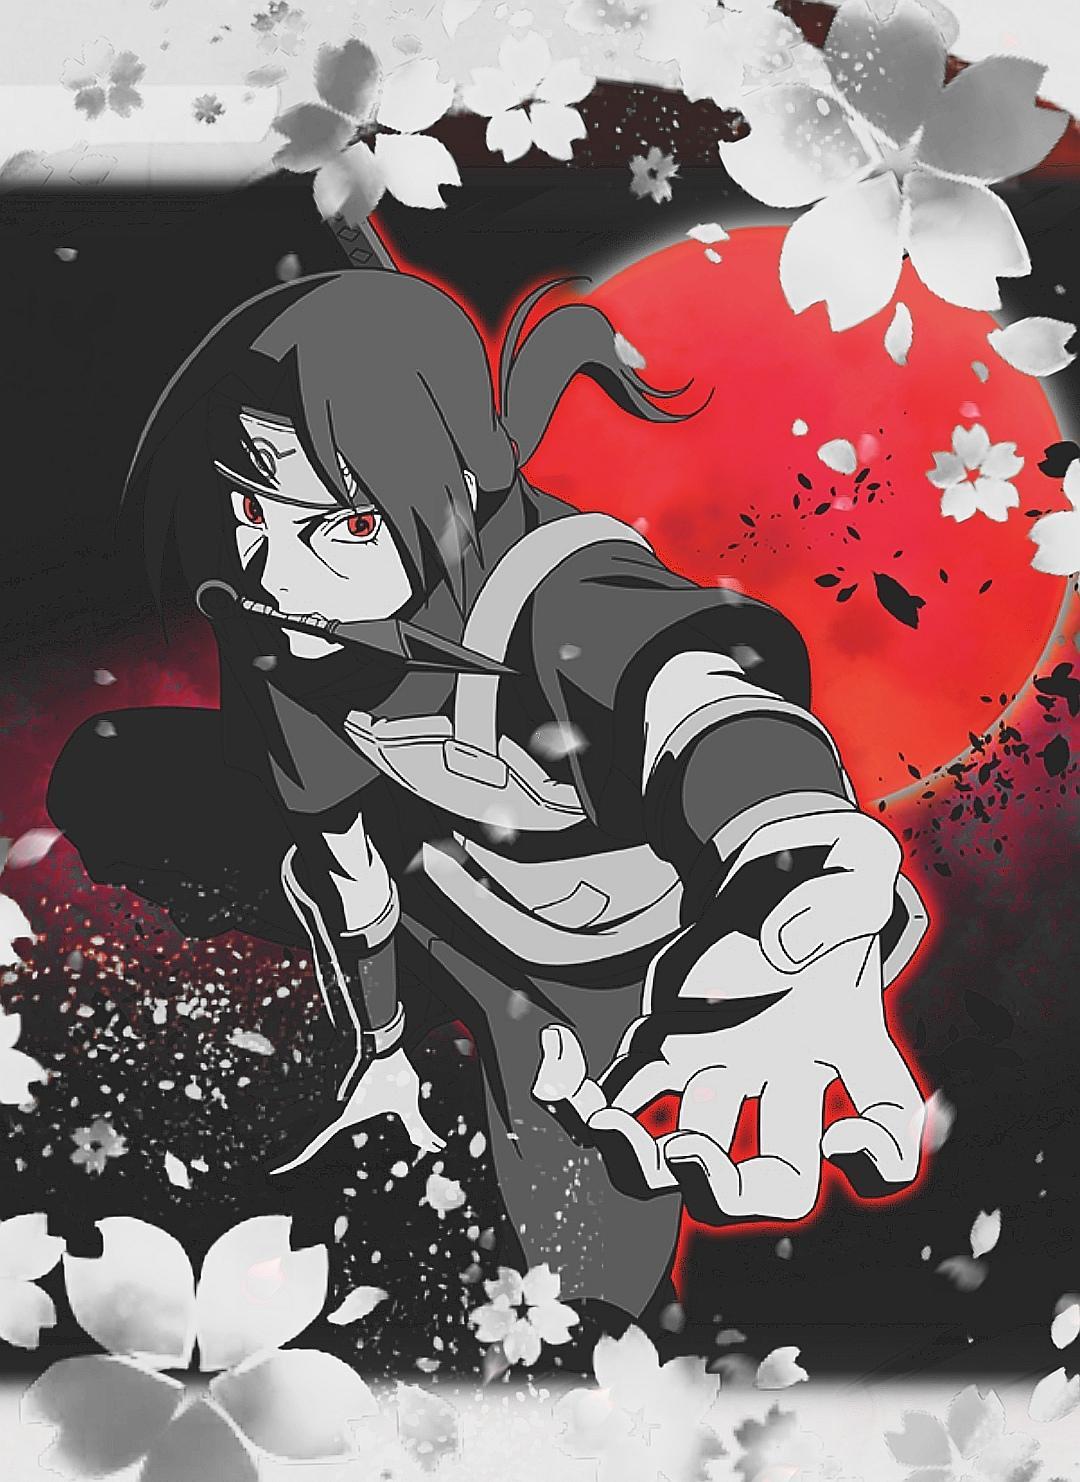 Made this wallpaper for you guys. I can make wallpaper from Sasuke